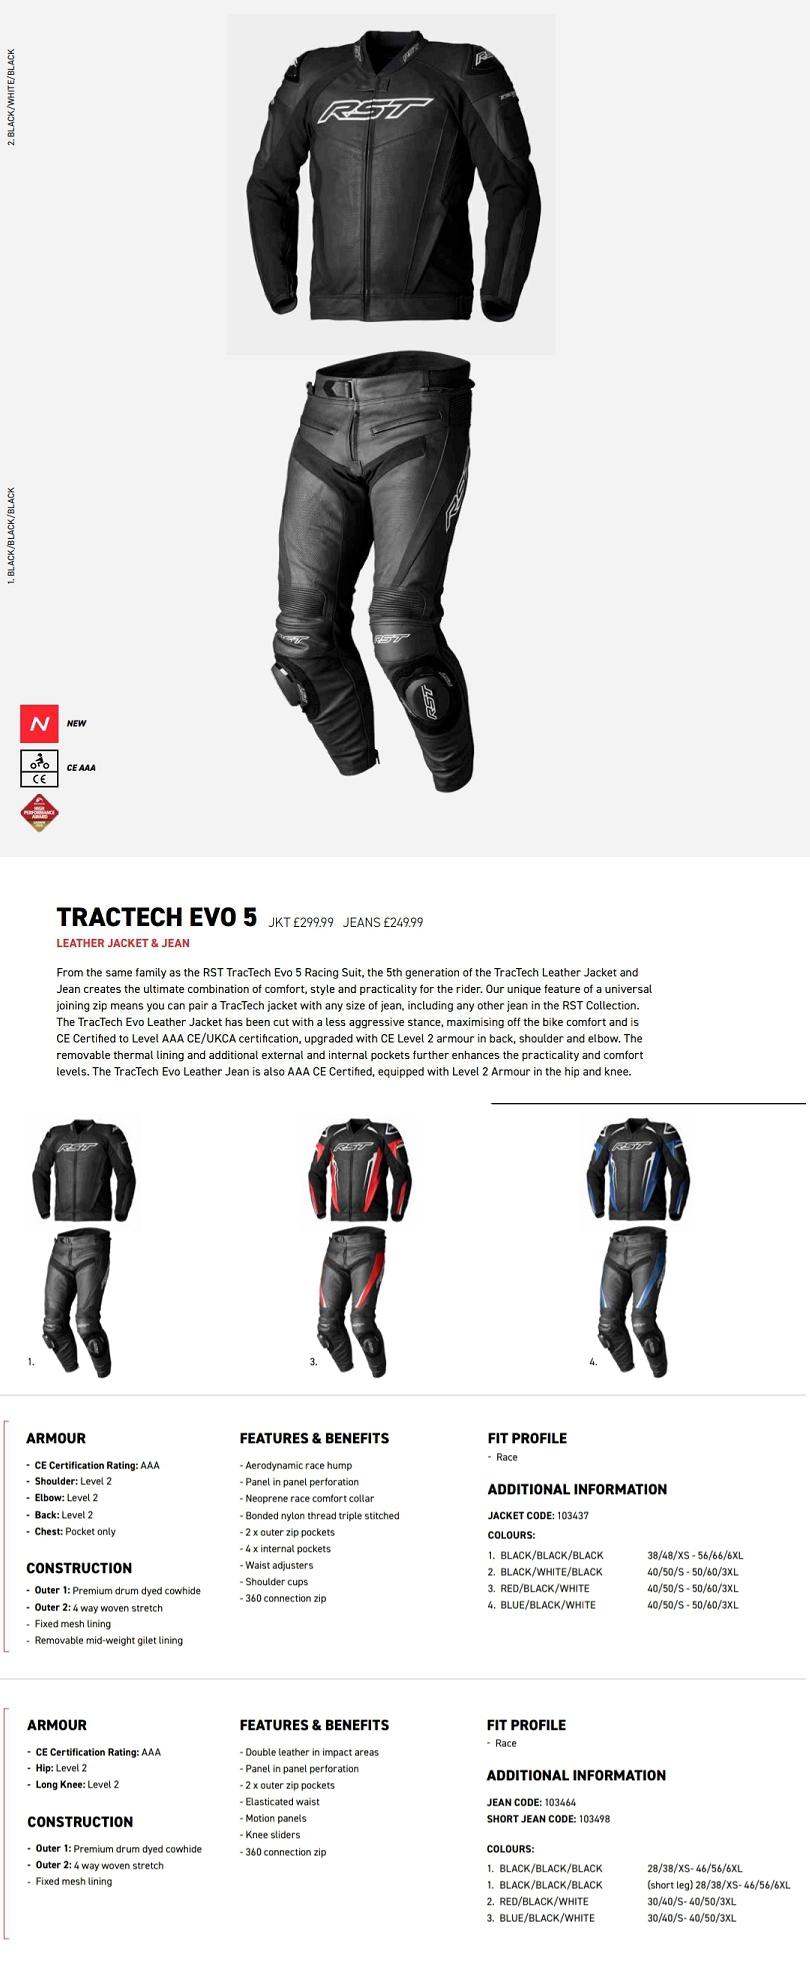 RST Tractech leather jacket and pant